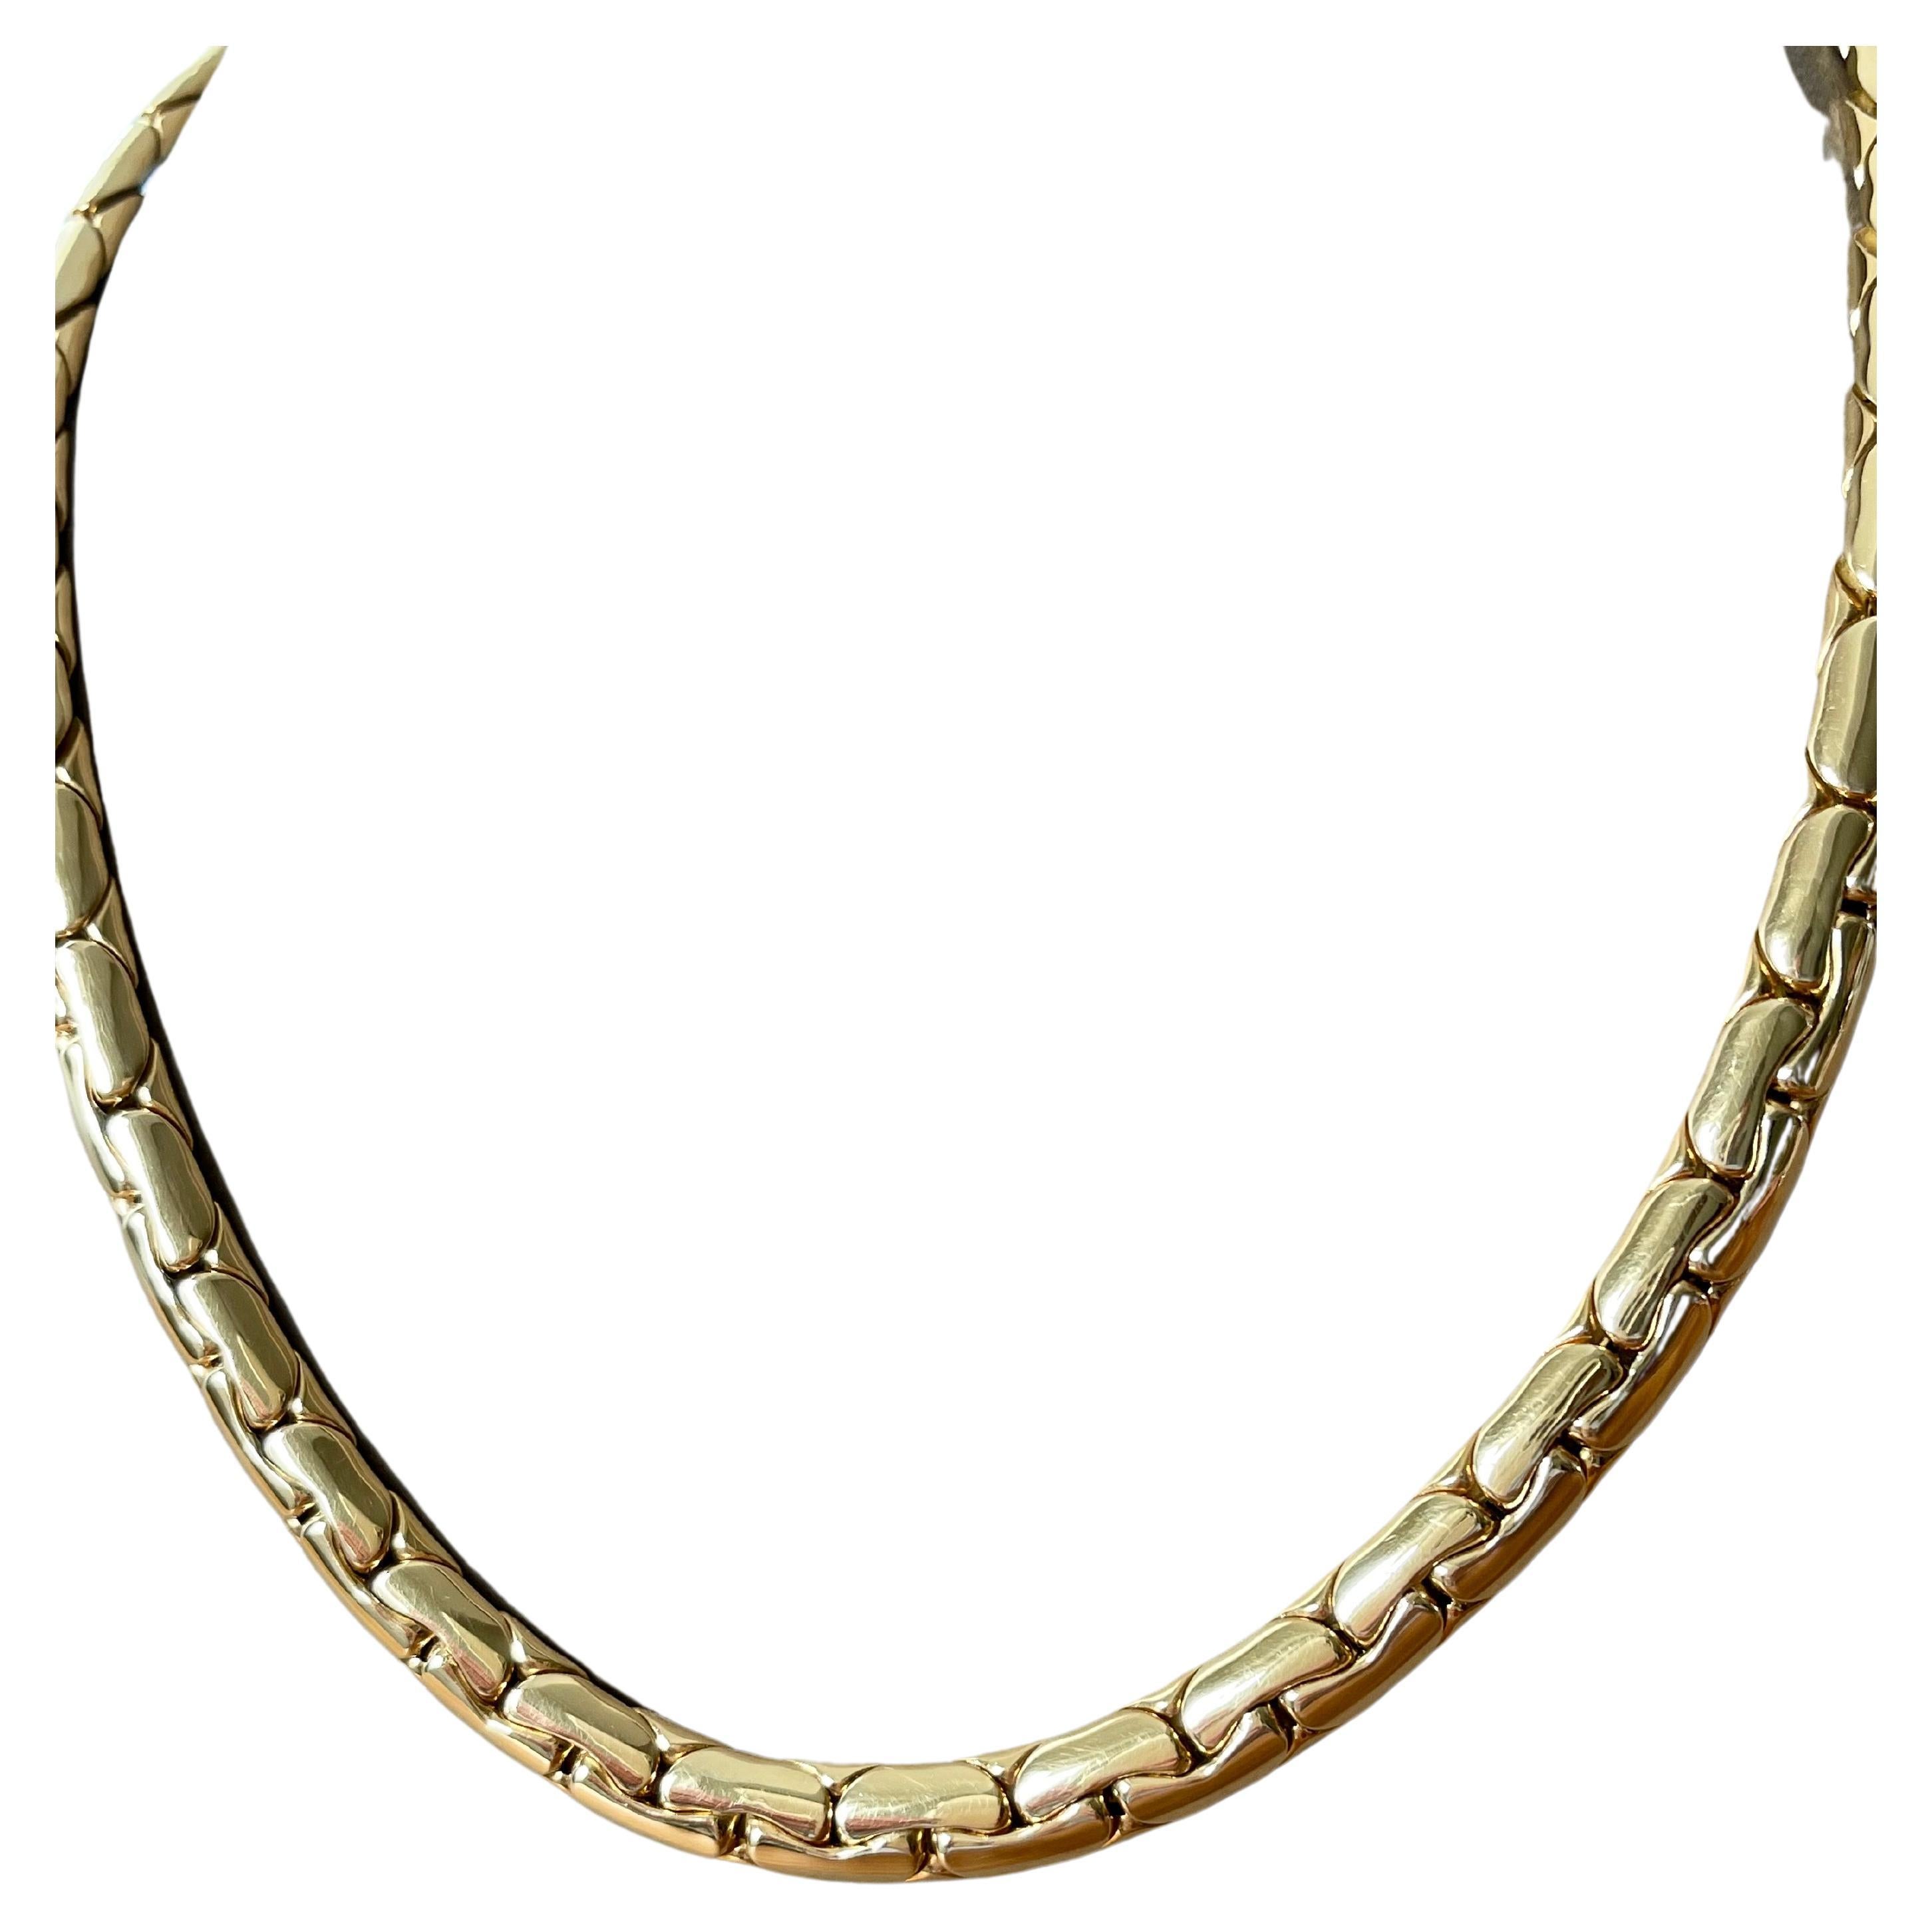 A fancy handmade 18 K yellow Gold link necklace by Gübelin Lucerne. Length: 45 cm. Weight: 69.3 grams.Width of necklace: 0.75 cm.
Masterfully handcrafted piece! Authenticity and money back is guaranteed.
For any enquires, please contact the seller